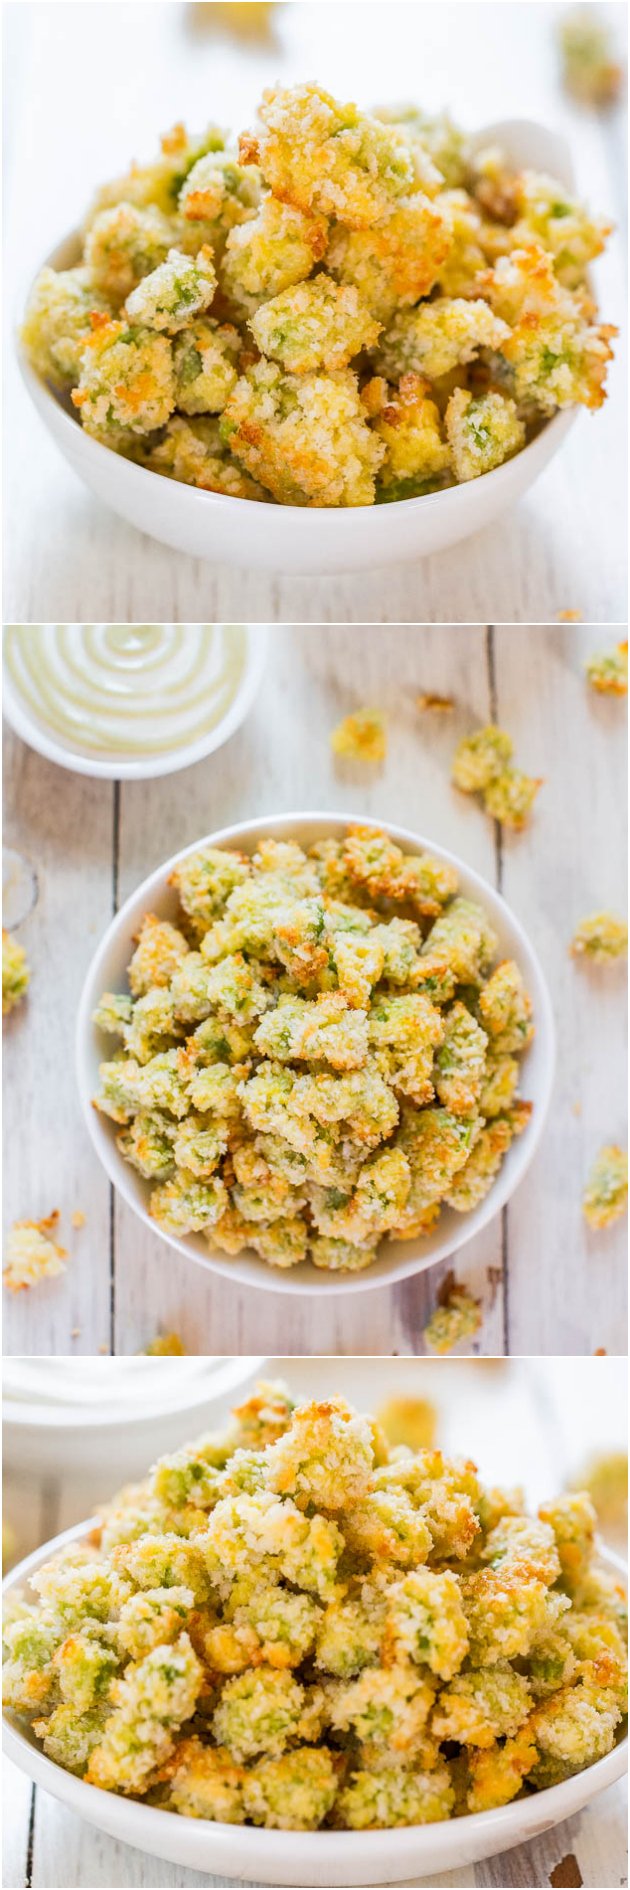 Baked Parmesan Edamame Bites with Creamy Wasabi Dip -The ultimate in mini comfort food! You'll want to inhale the whole batch!